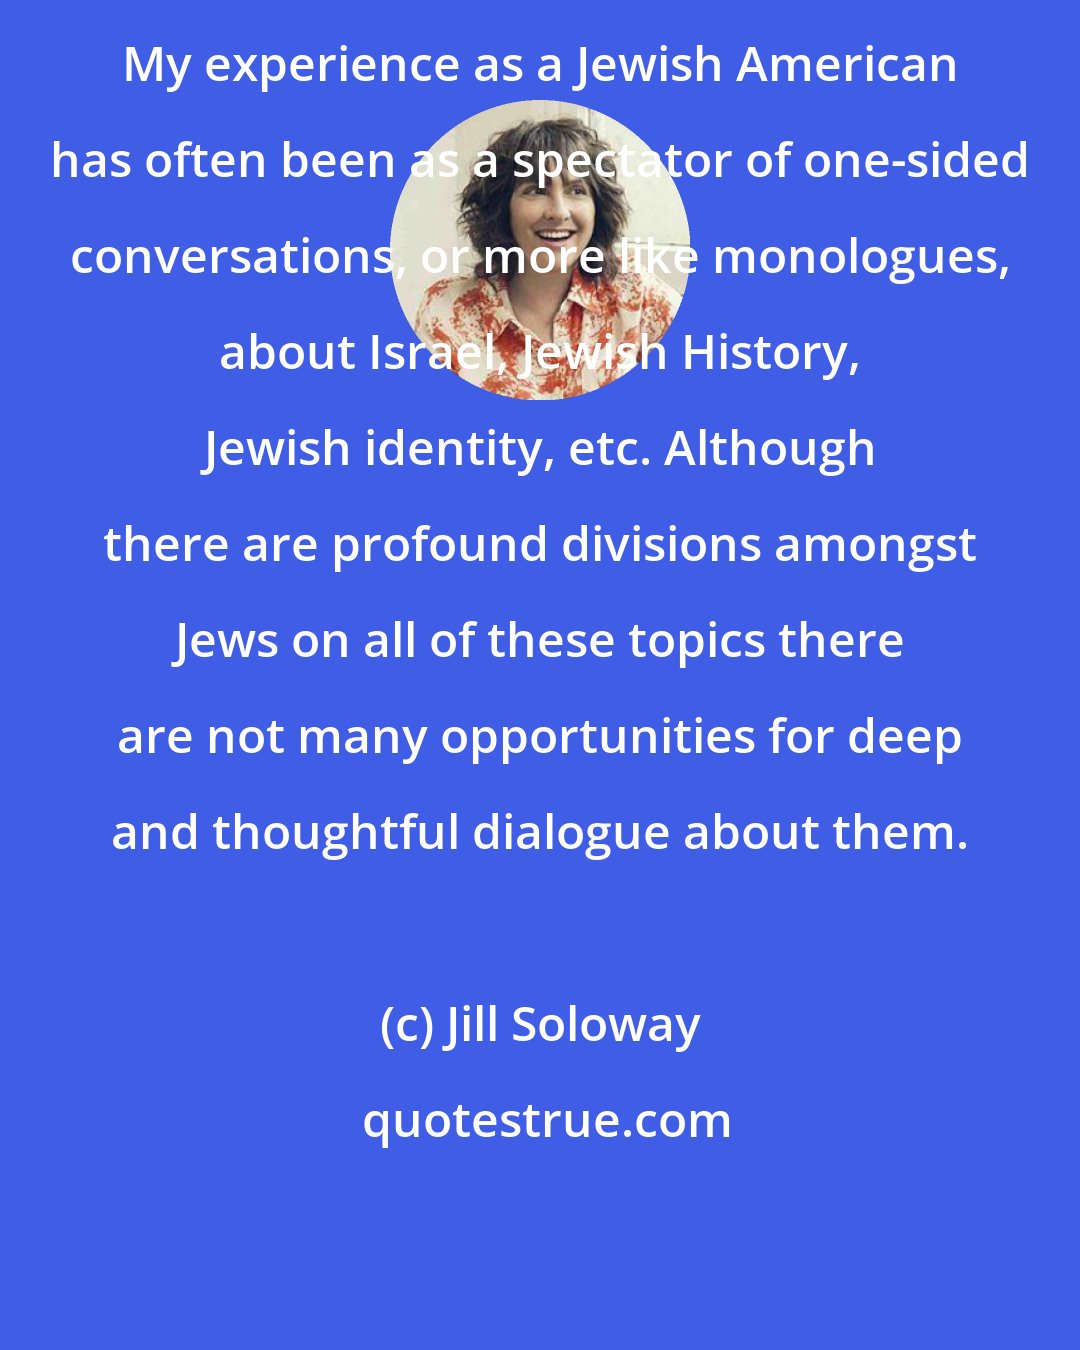 Jill Soloway: My experience as a Jewish American has often been as a spectator of one-sided conversations, or more like monologues, about Israel, Jewish History, Jewish identity, etc. Although there are profound divisions amongst Jews on all of these topics there are not many opportunities for deep and thoughtful dialogue about them.